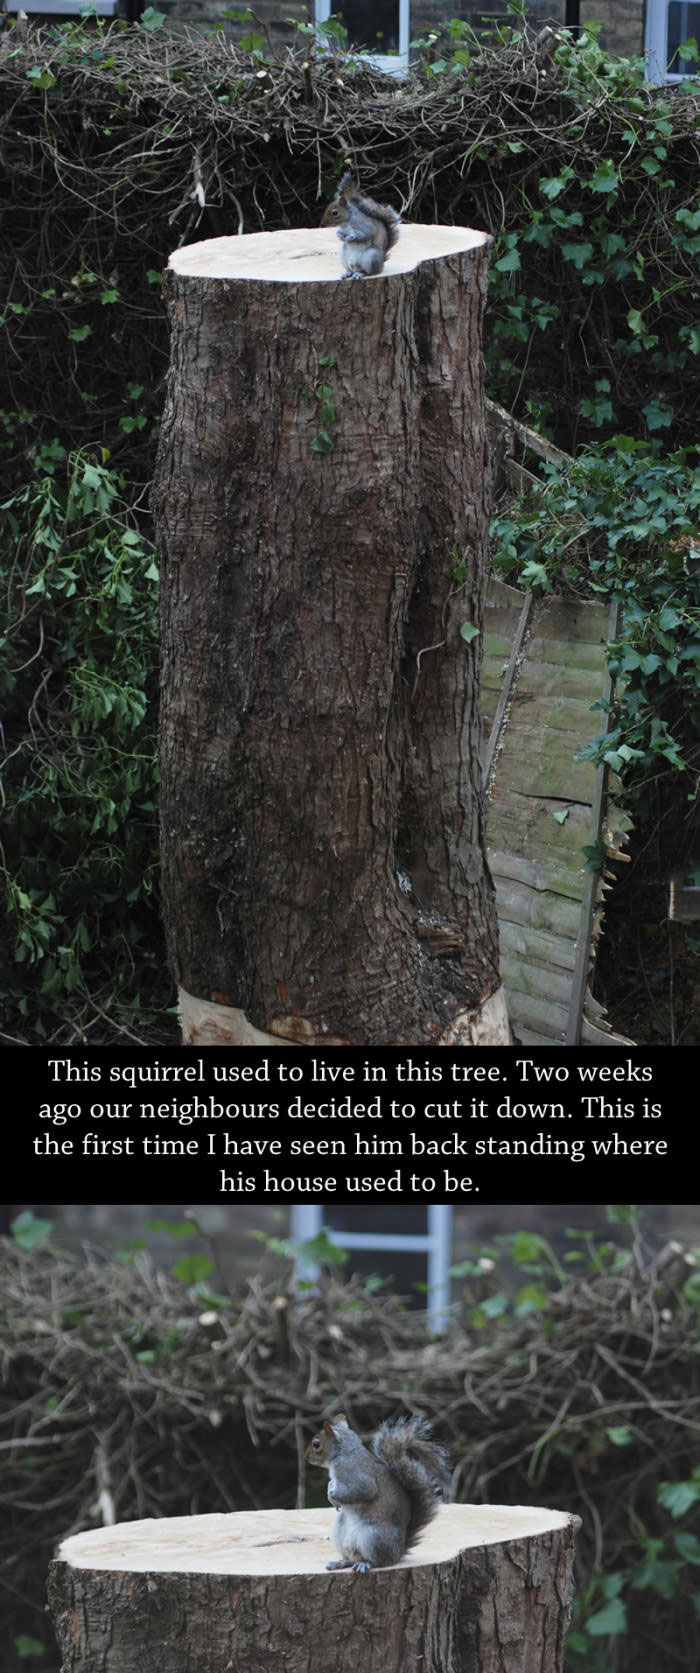 this squirrel used to live in this tree, two weeks ago our neighbours decided to cut it down, this is the first time i have seen him back standing where his house used to be